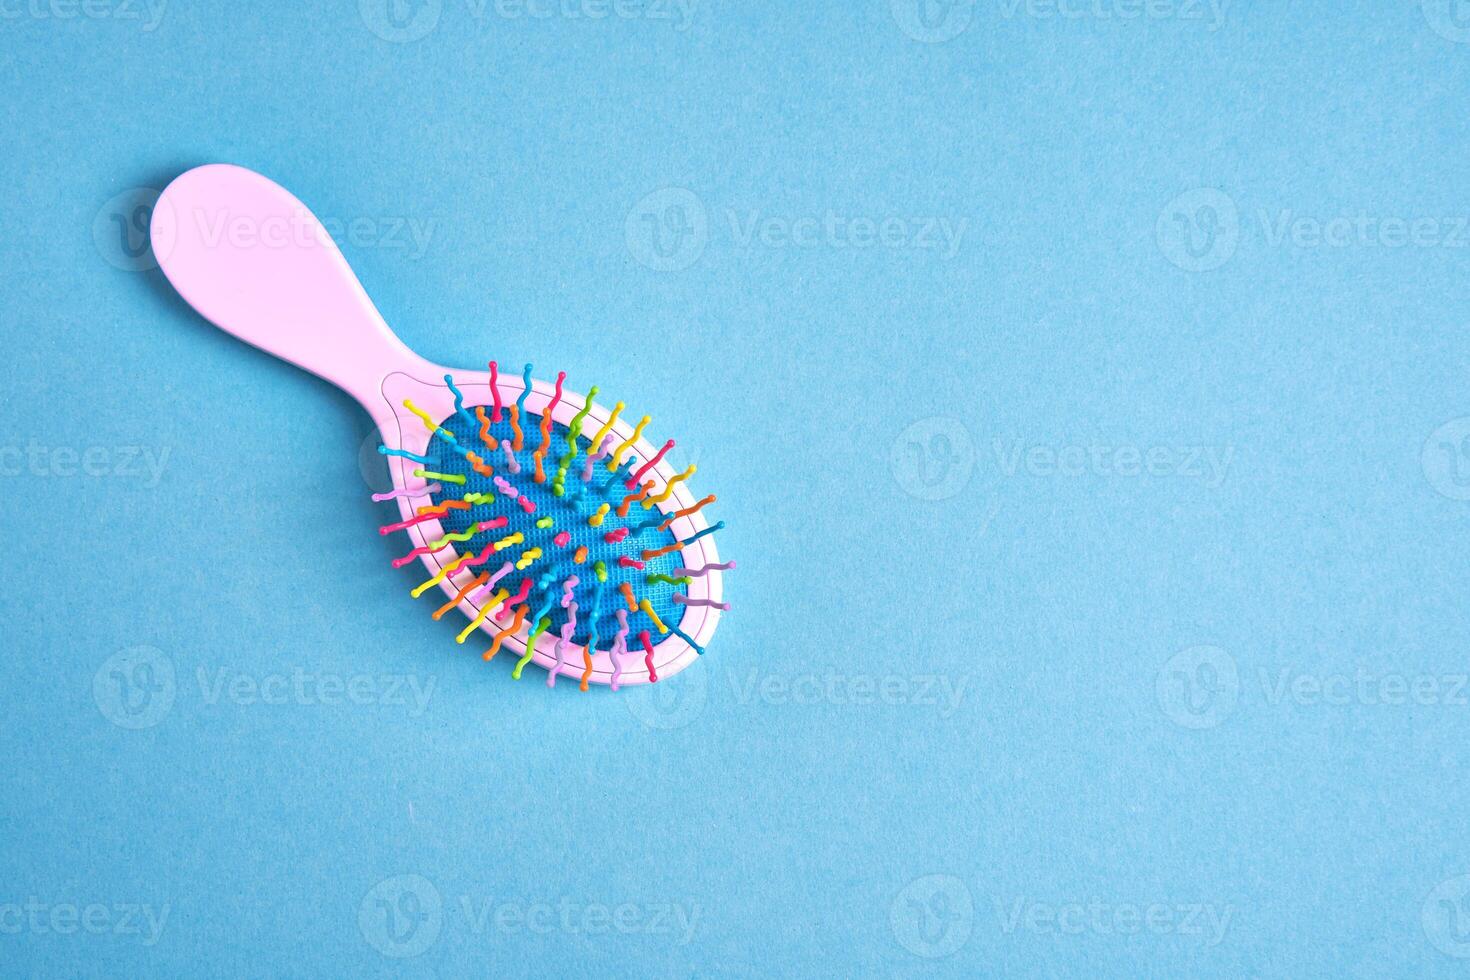 Funny baby comb with multi-colored plastic wavy bristles lies on a blue background. photo